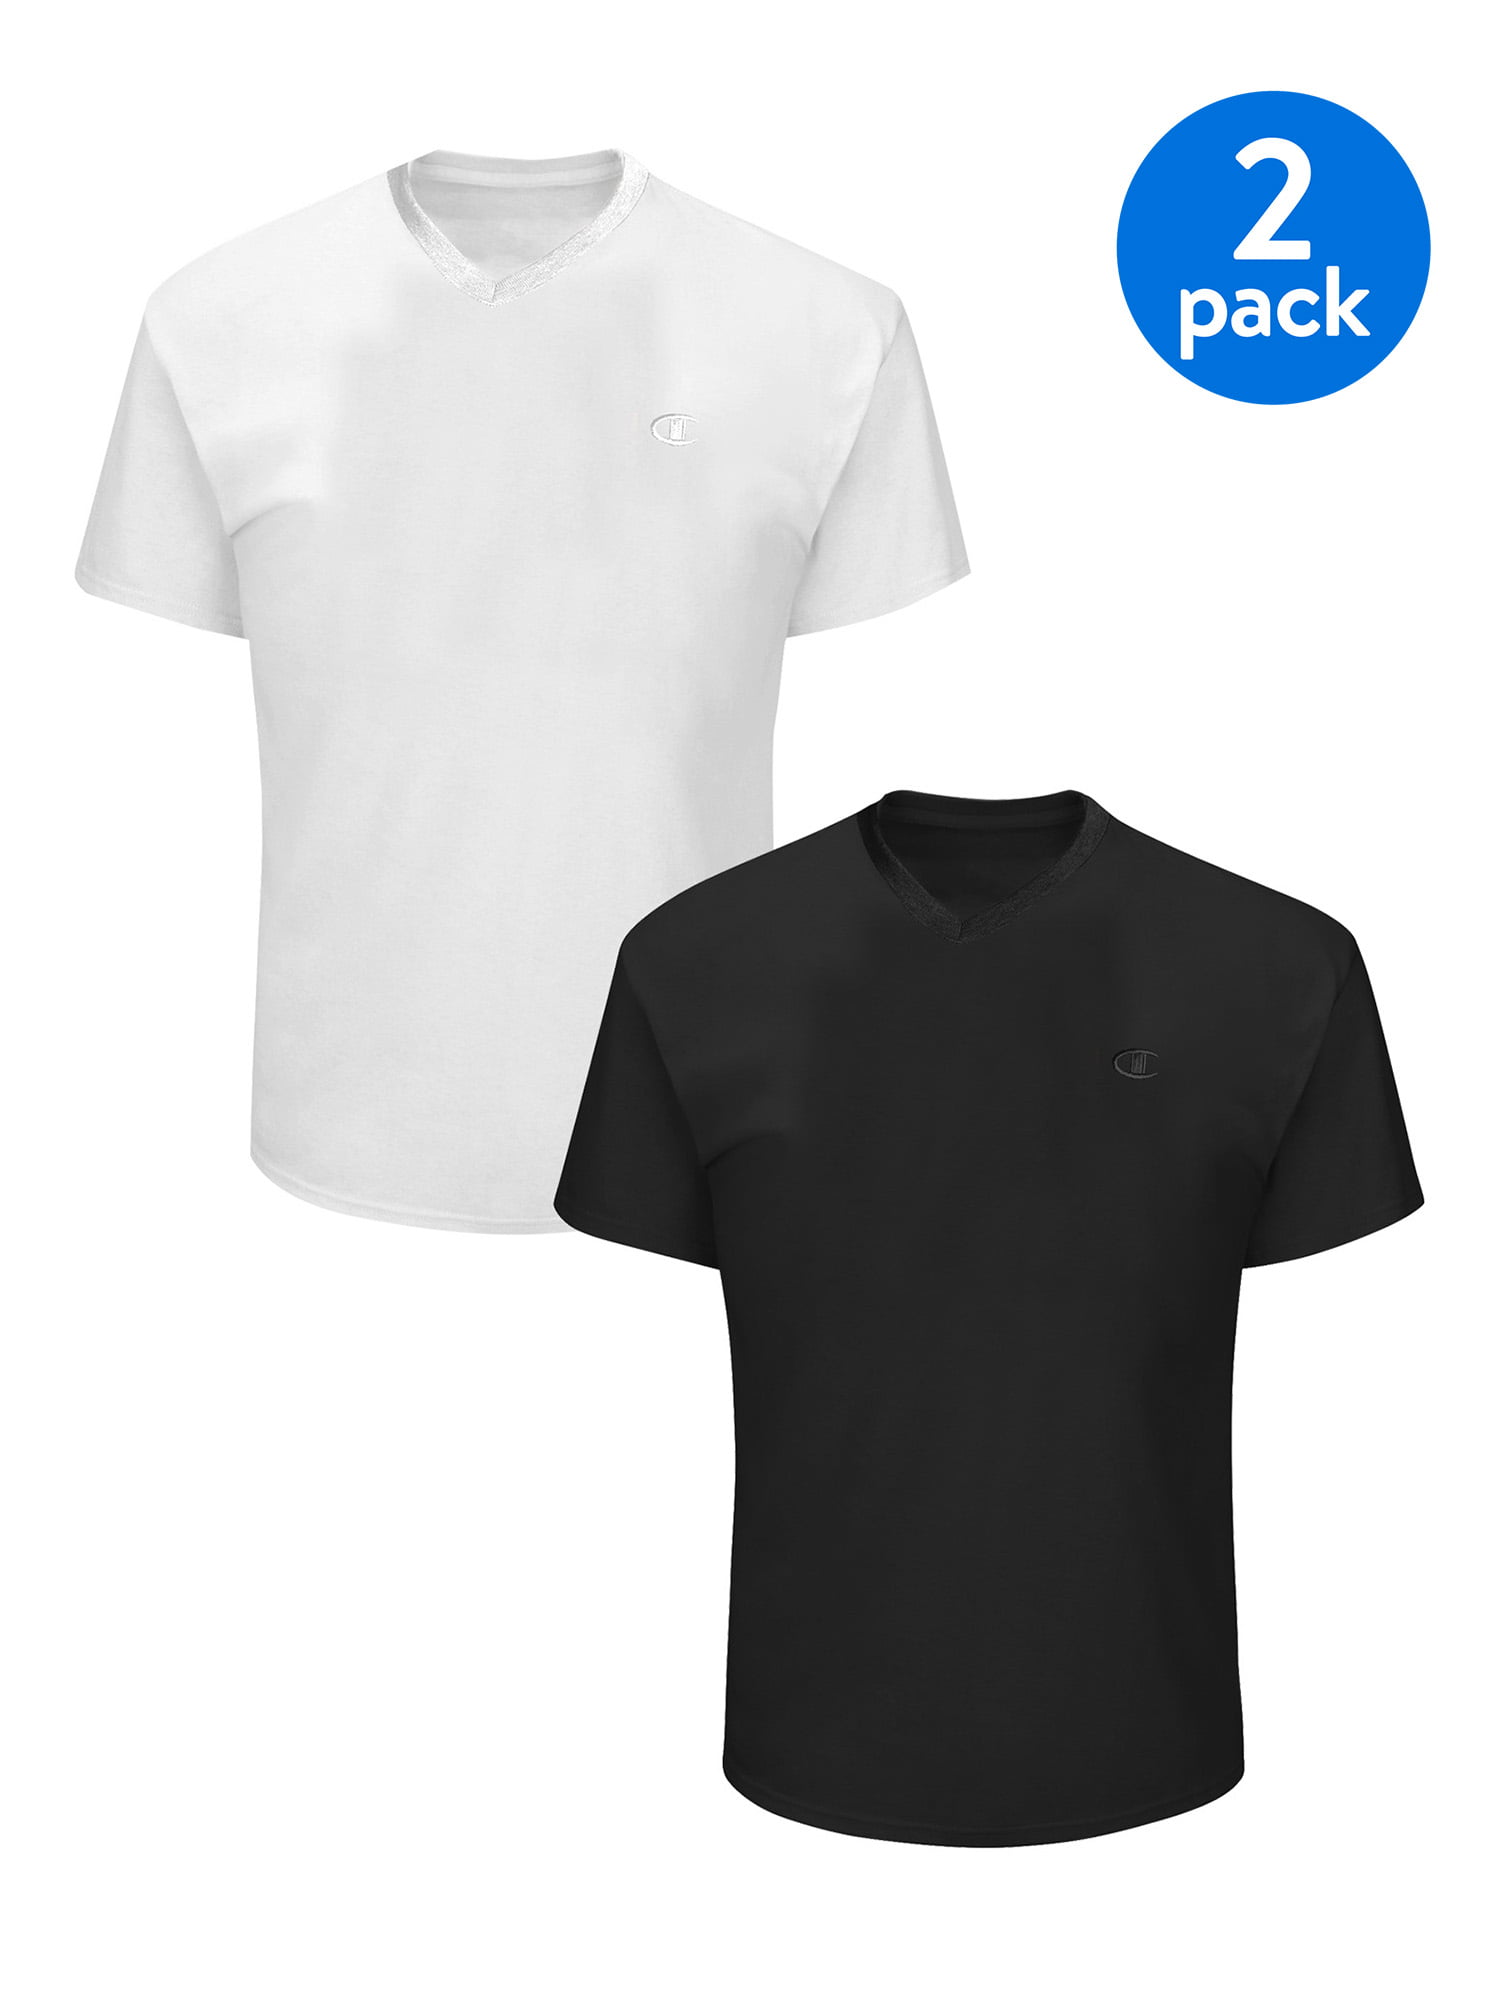 Champion Men's Big Tall Classic V-Neck Tees, 2 Pack Sizes LT to 6X -